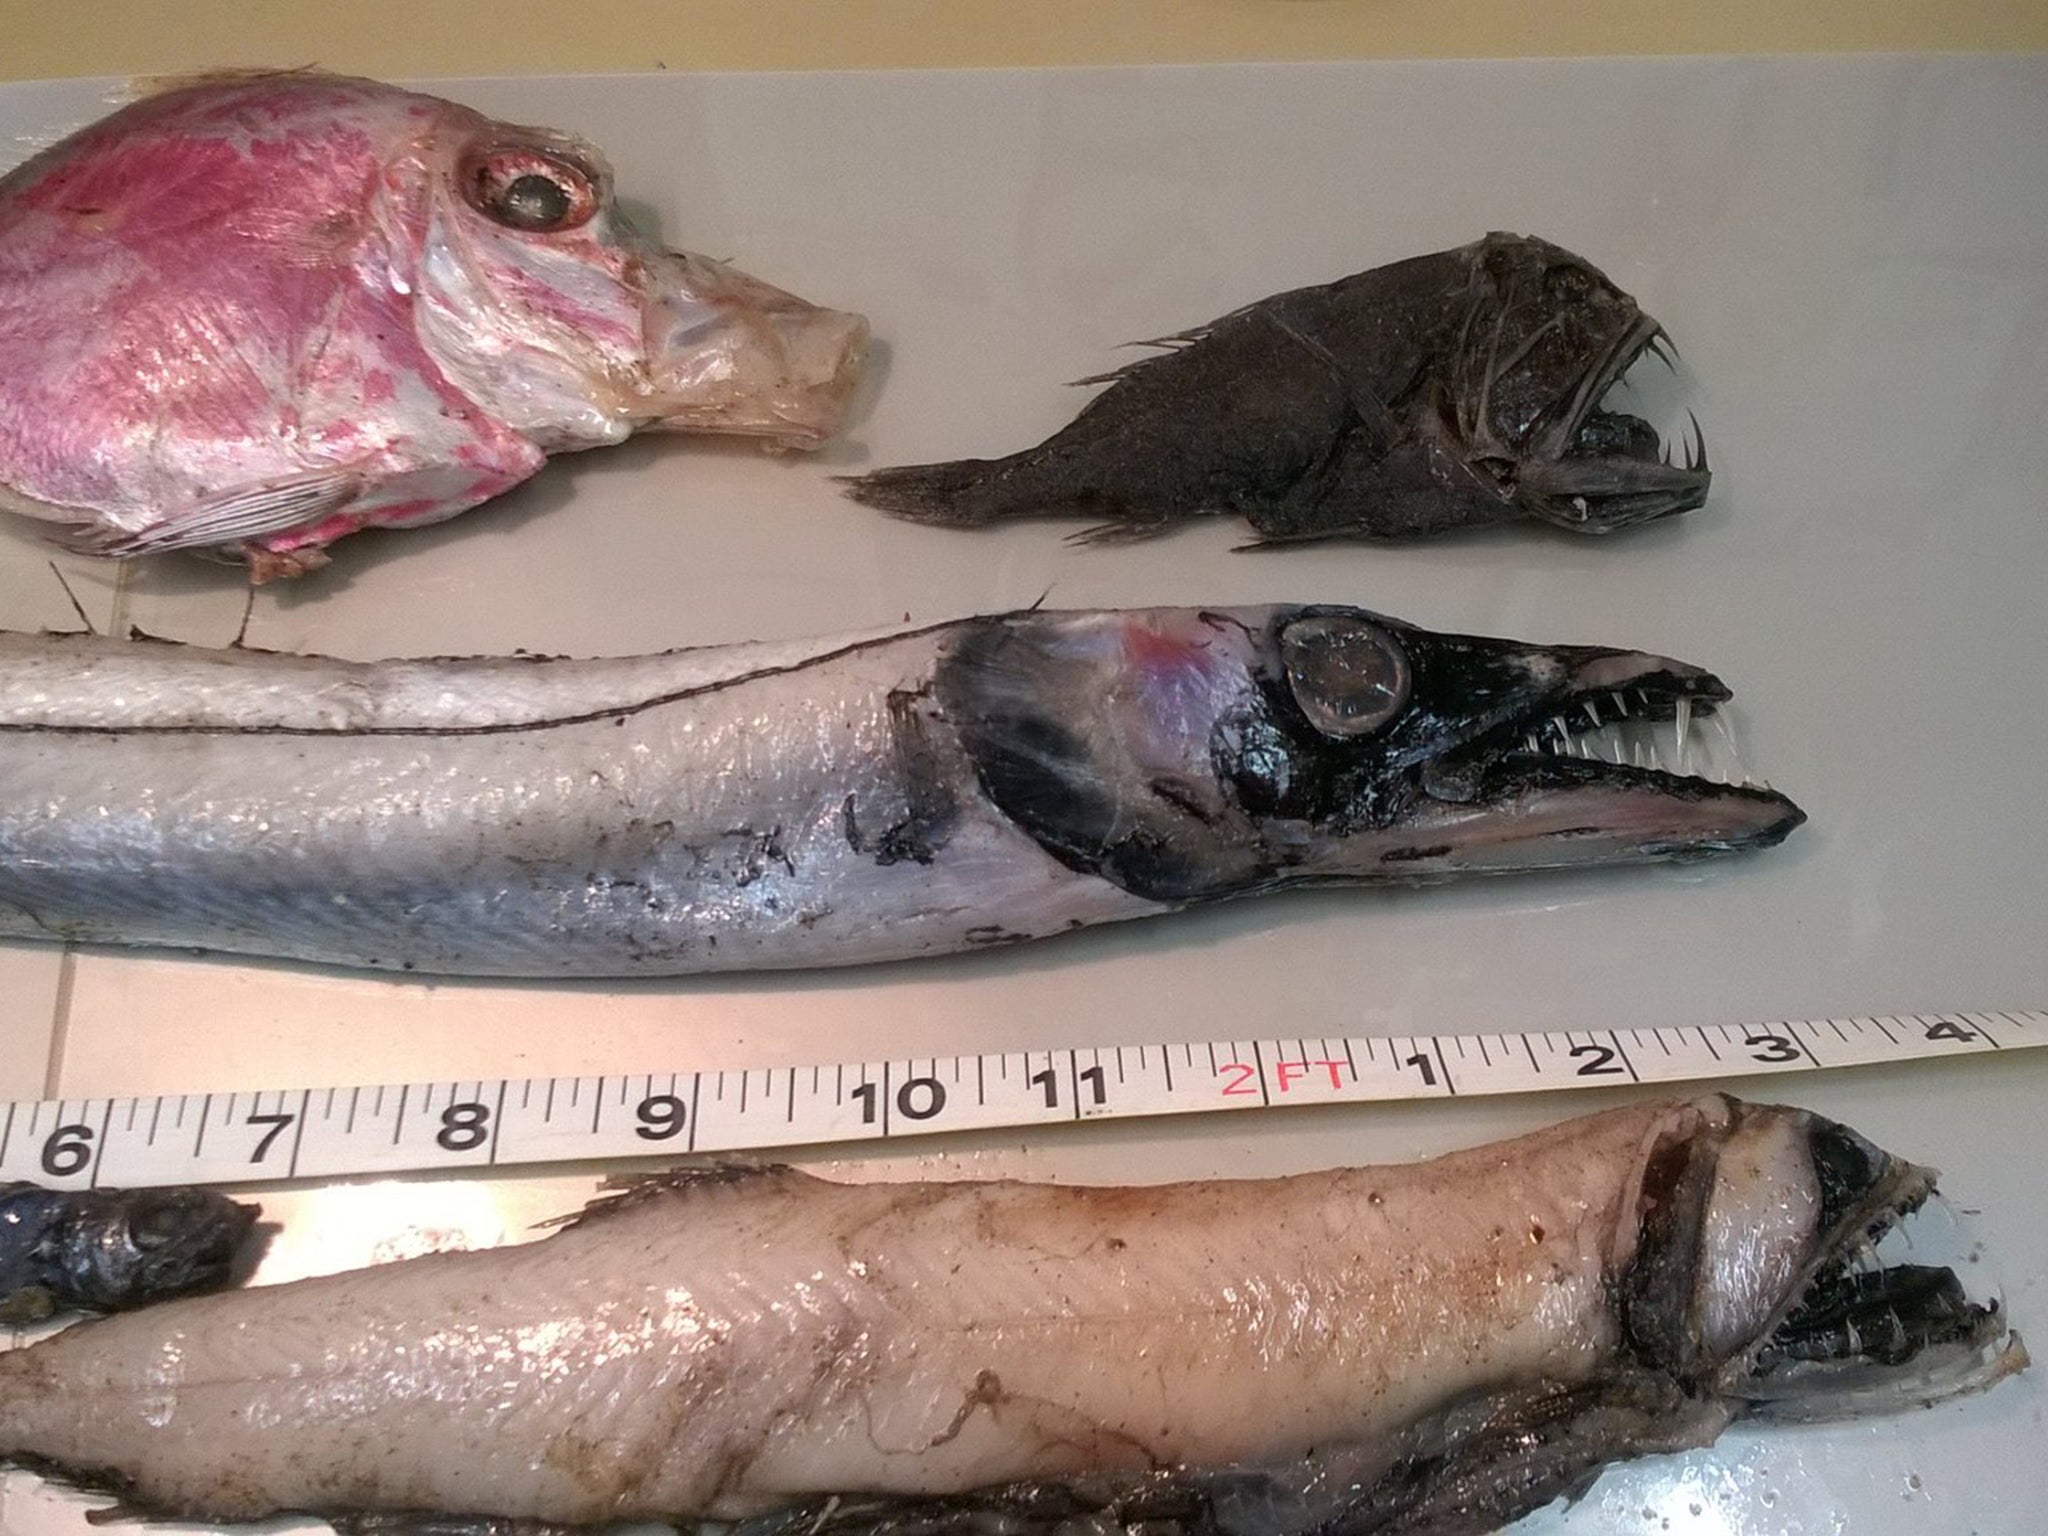 A selection of the fish found including a Fangtooth, Black Scabbard and Viper fish